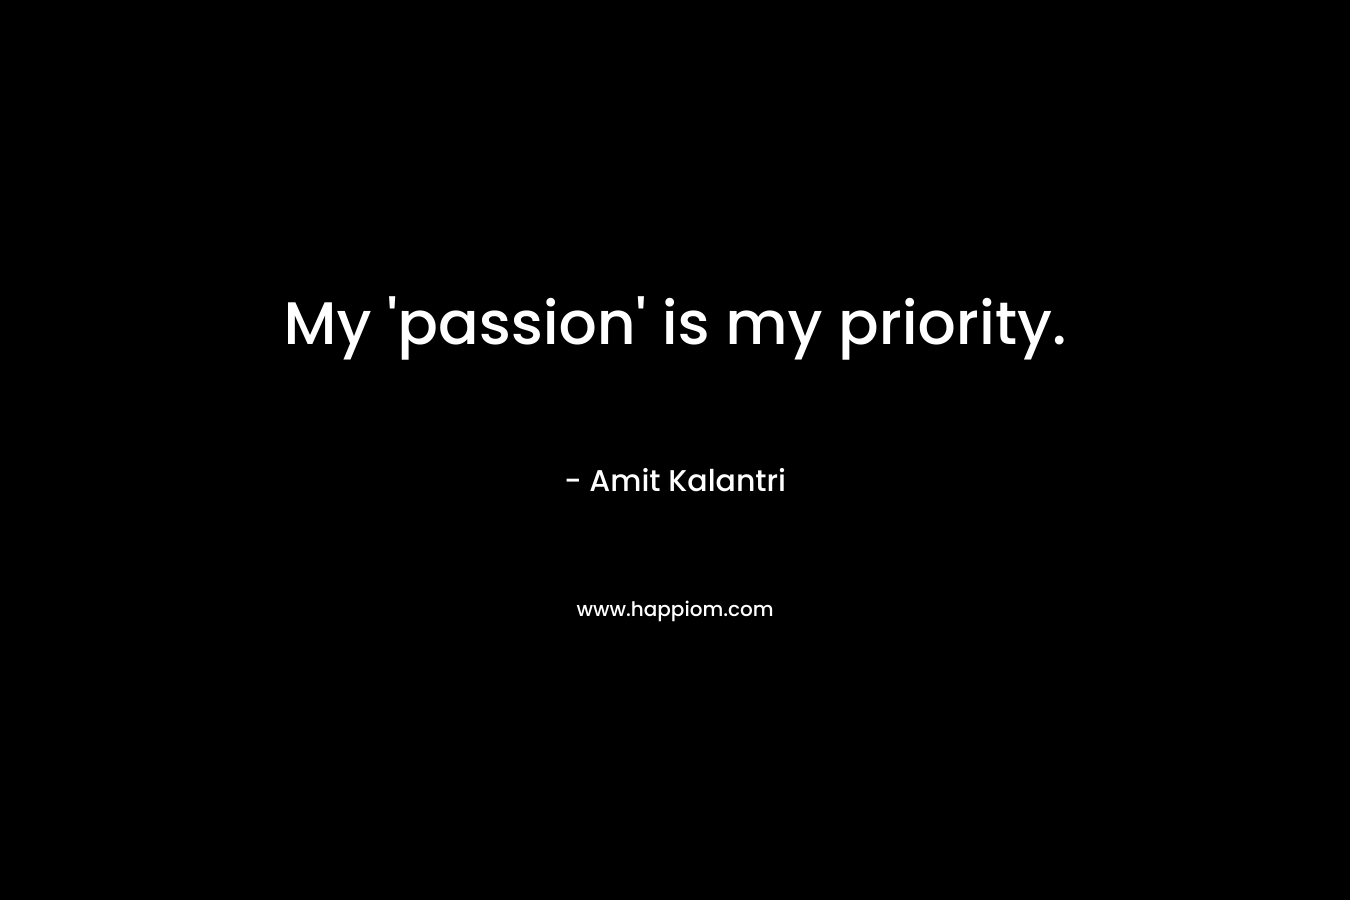 My 'passion' is my priority.